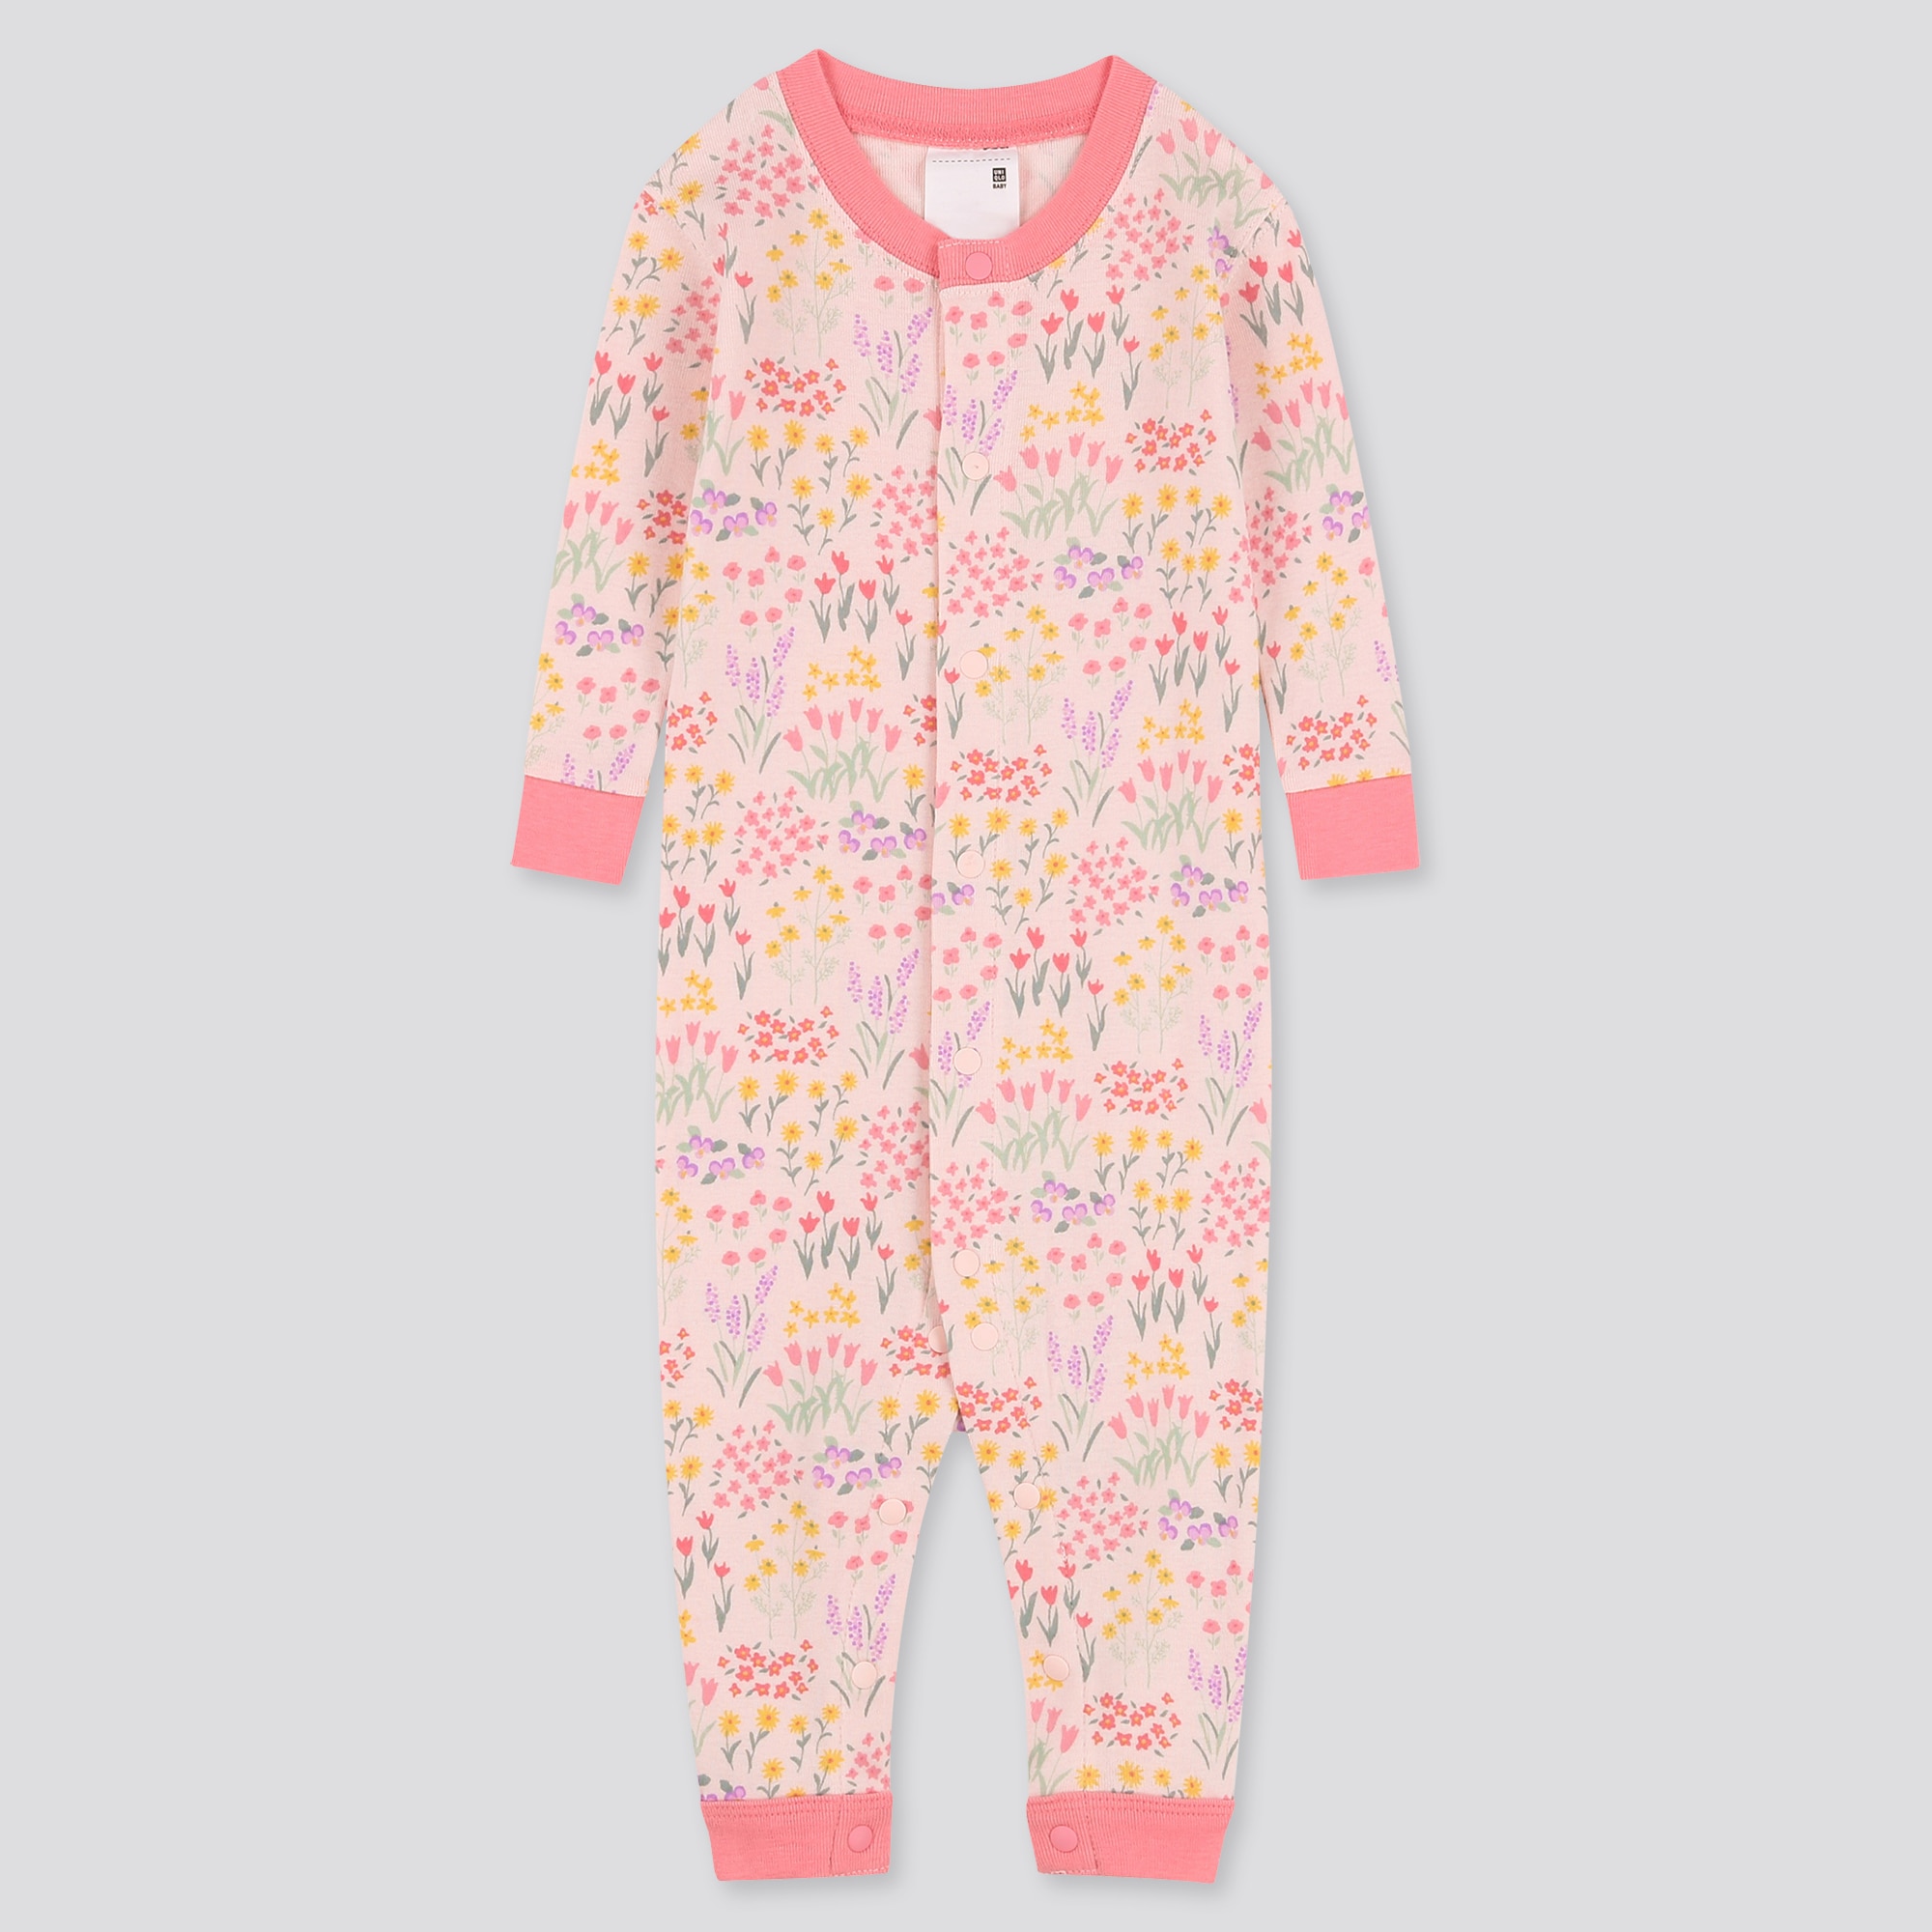 newborn one piece outfit